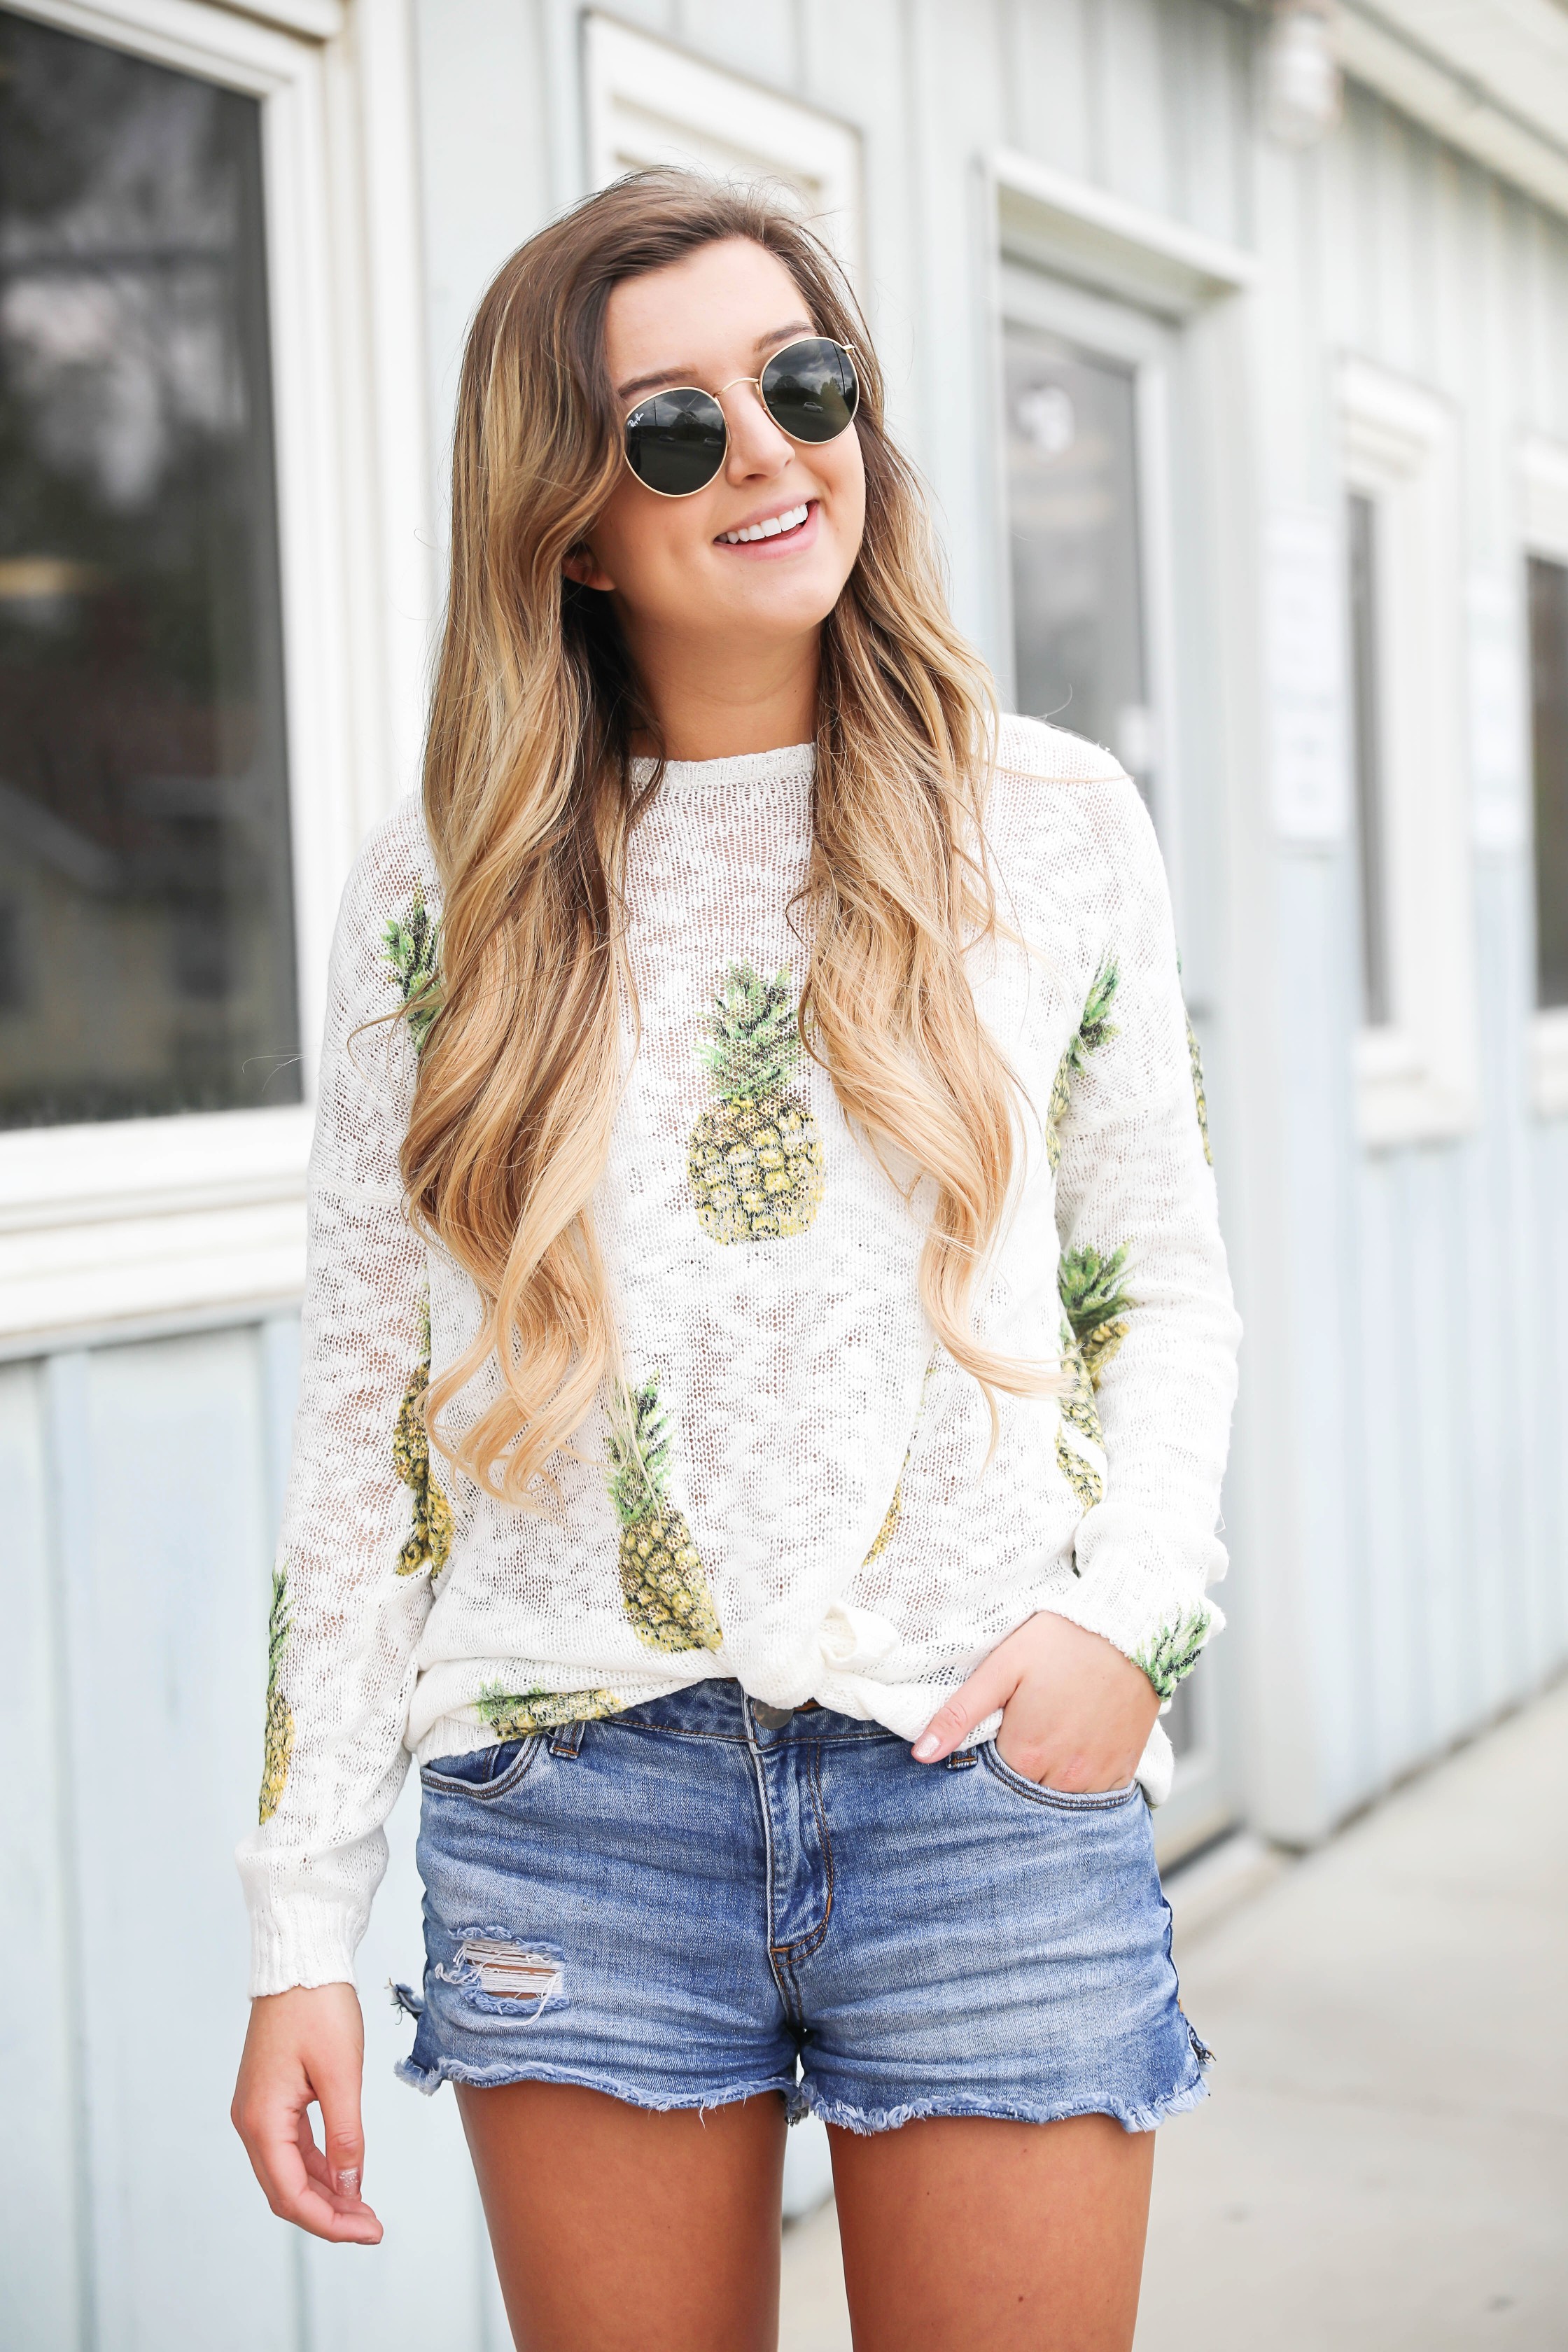 Cute pineapple sweater tucked into denim shorts for spring! Show Me Your Mumu pineapple sweater! I love this spring outfit, this adorable spring sweater is on fashion blog daily dose of charm by lauren lindmark